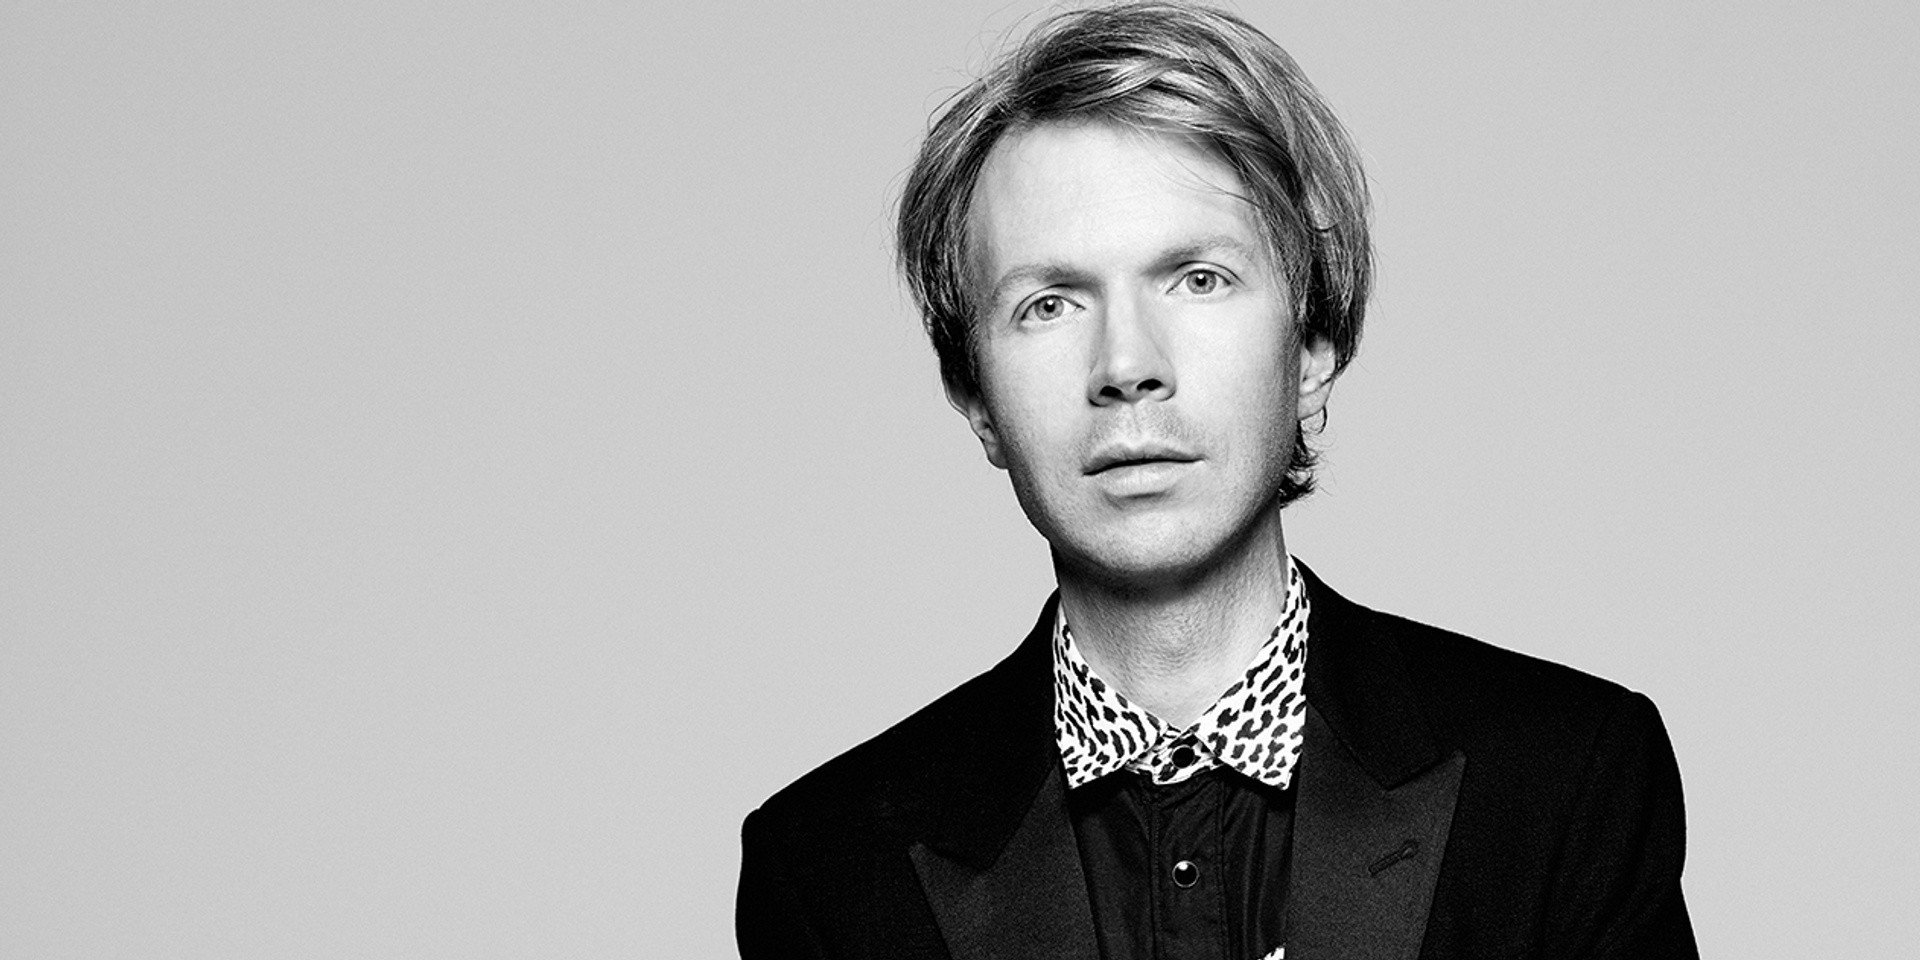 Beck is coming to Asia